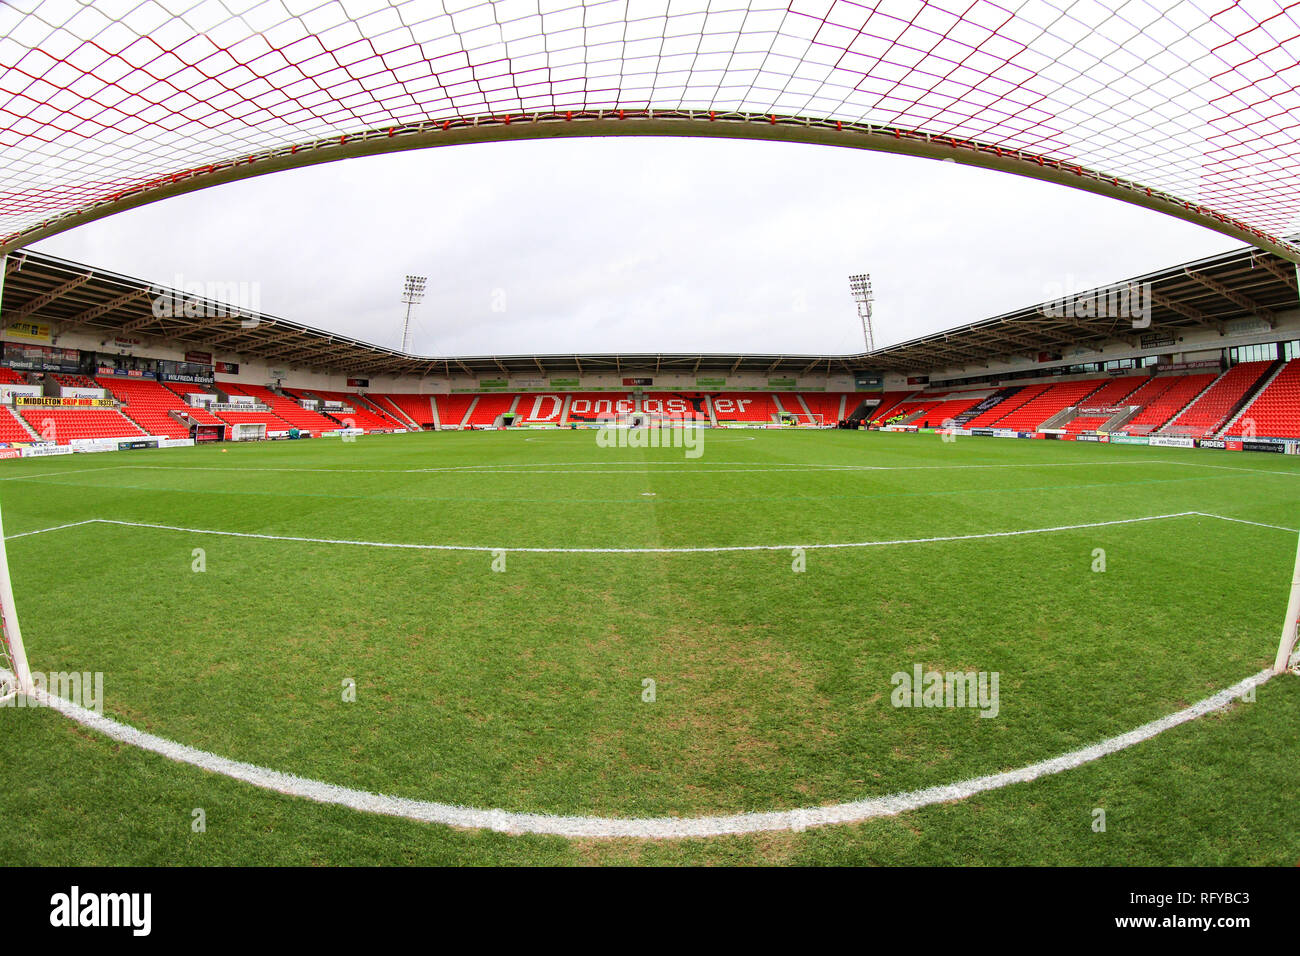 26th January 2019, Keepmoat Stadium, Doncaster, England; The Emirates FA Cup, 4th Round, Doncaster Rovers vs Oldham Athletic ; Keepmoat Stadium, home of Doncaster Rovers FC  Credit: John Hobson/News Images  English Football League images are subject to DataCo Licence Stock Photo